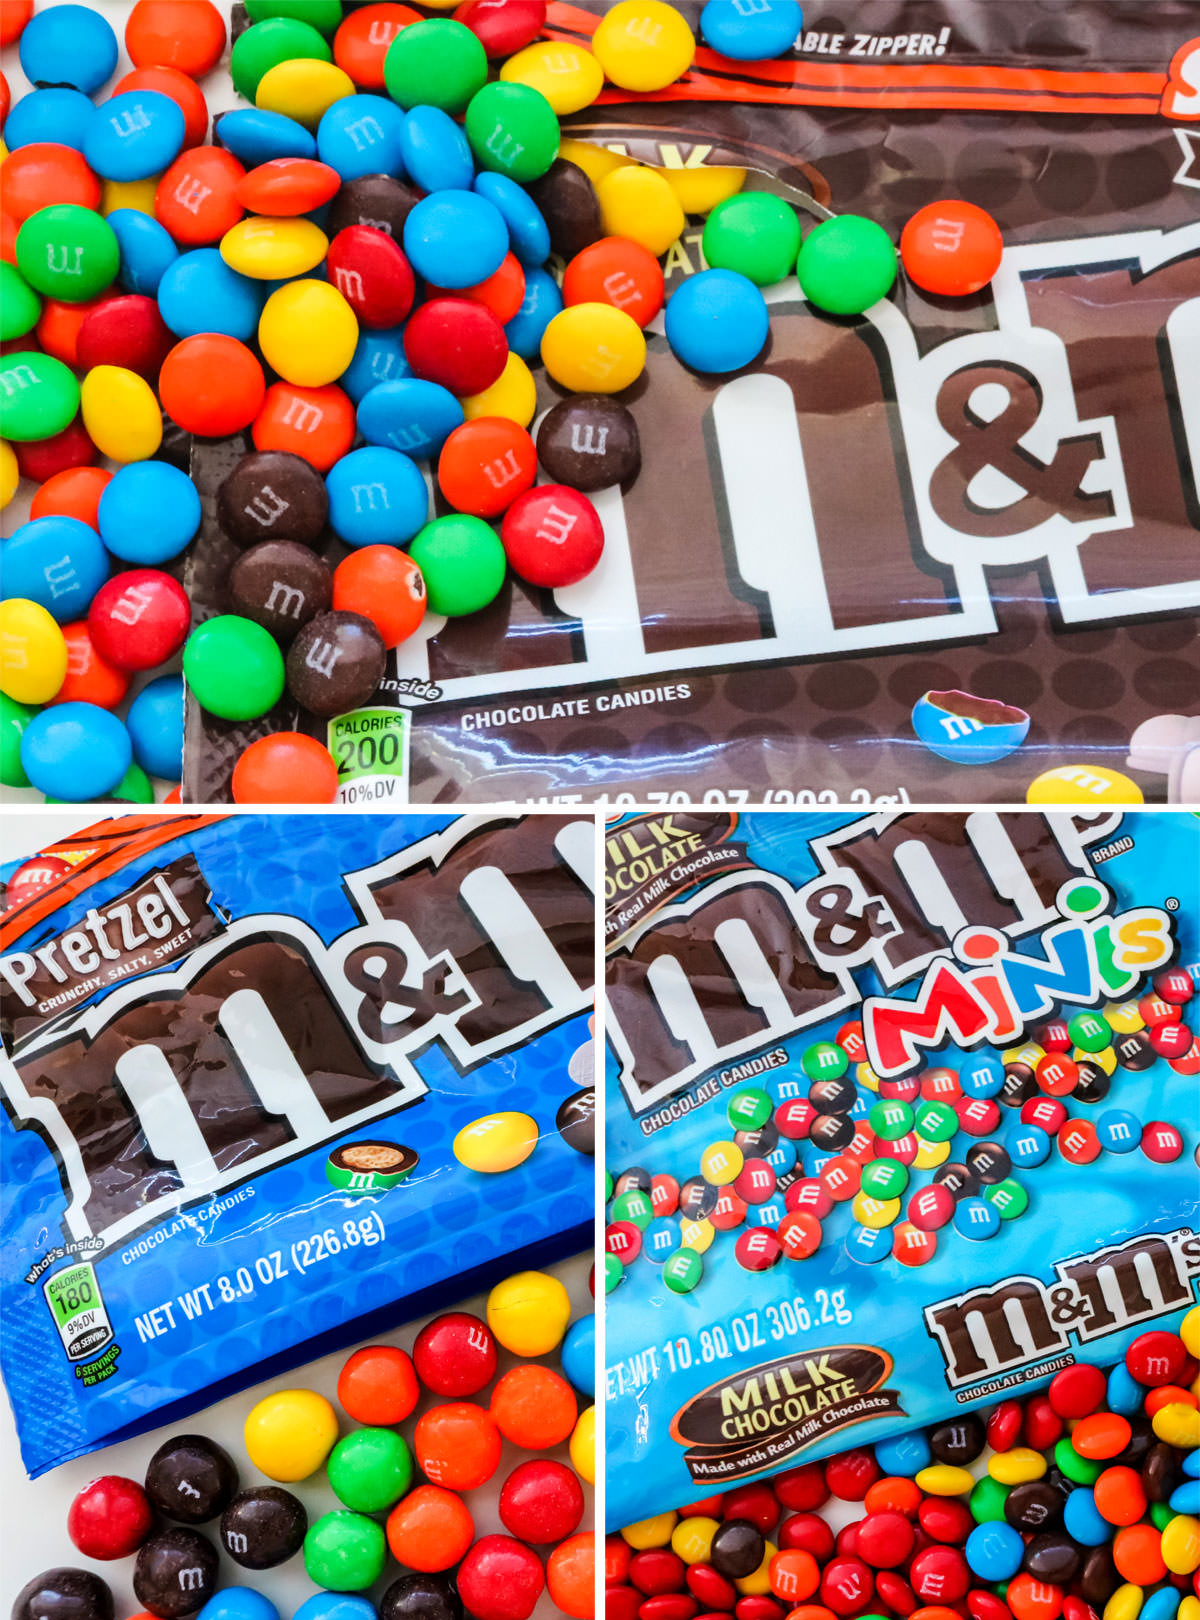 A collage image featuring bags of regular M&M's, Pretzel M&M's and M&M Minis.